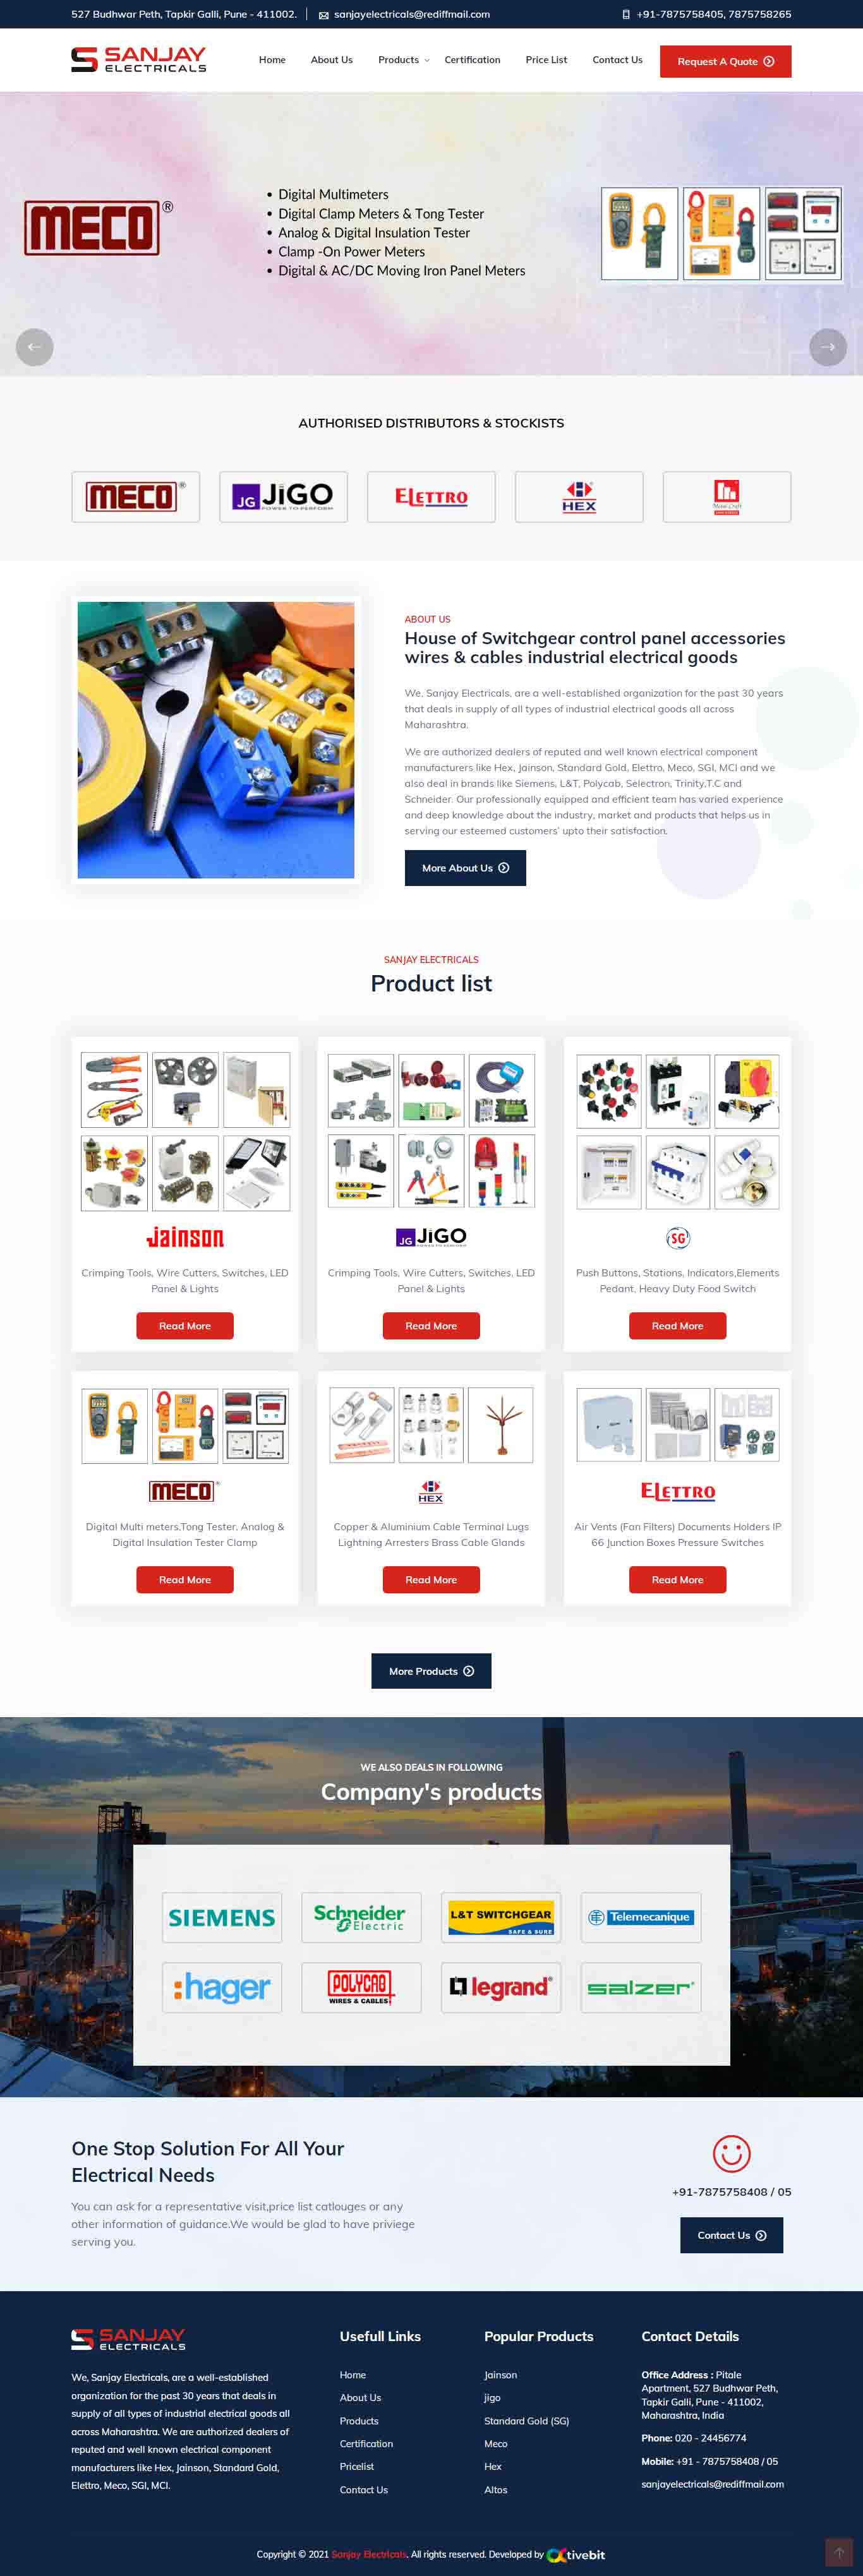 Sanjay Electricals - website design with CMS